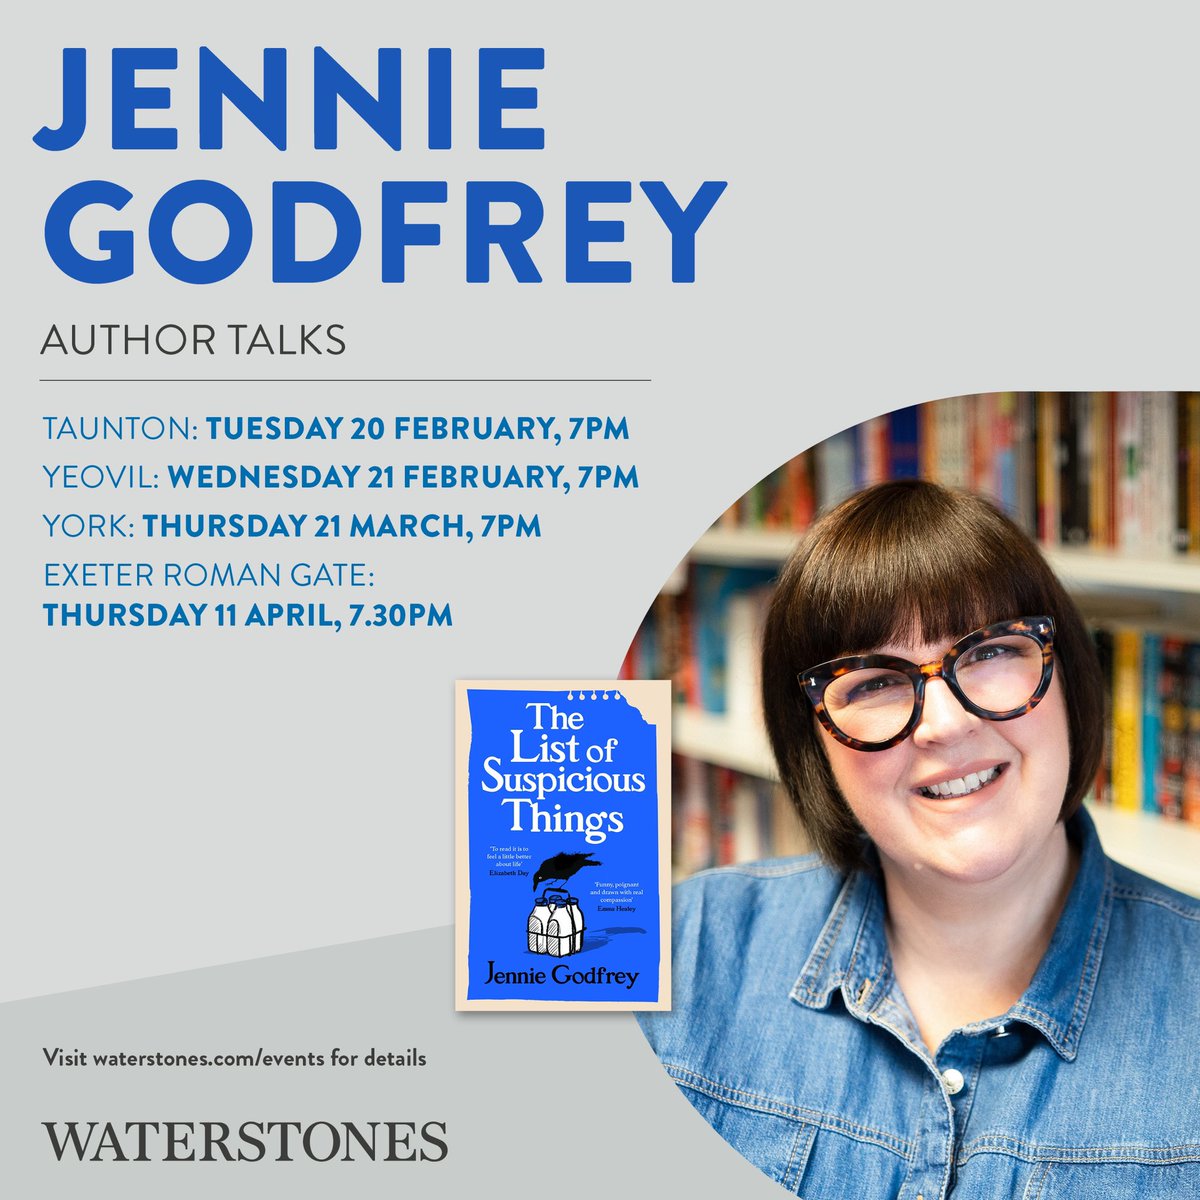 Quick event note from us. Our event with the amazing @jennieg_author has moved to the 11th April! This is an event you do not want to miss! More info here: waterstones.com/events/an-even…